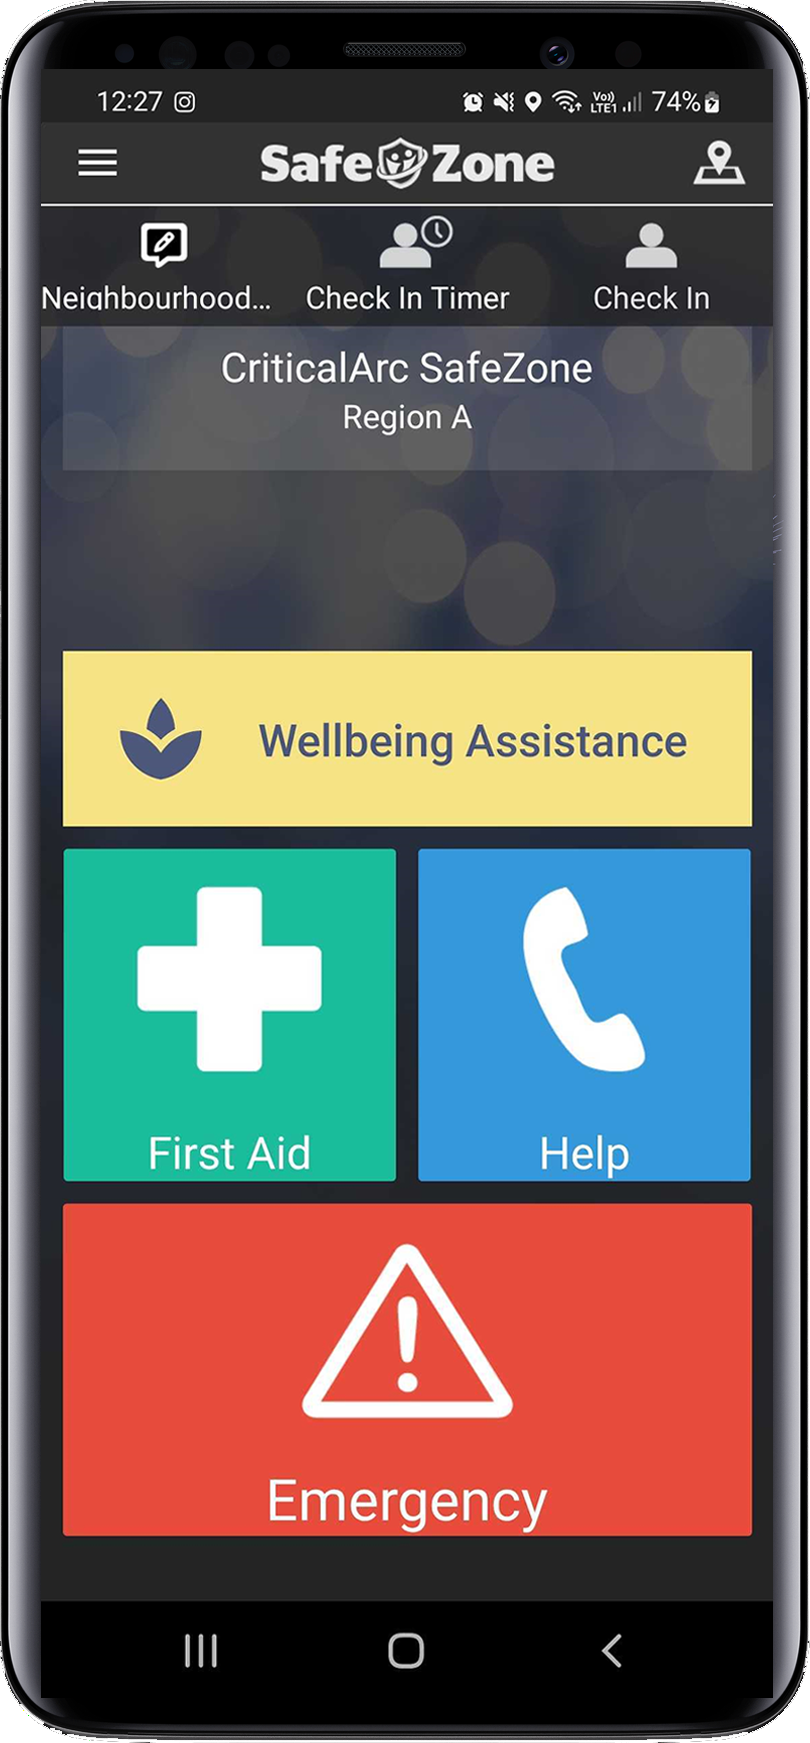 1_SafeZone_Wellbeing_Assistance_Button.png